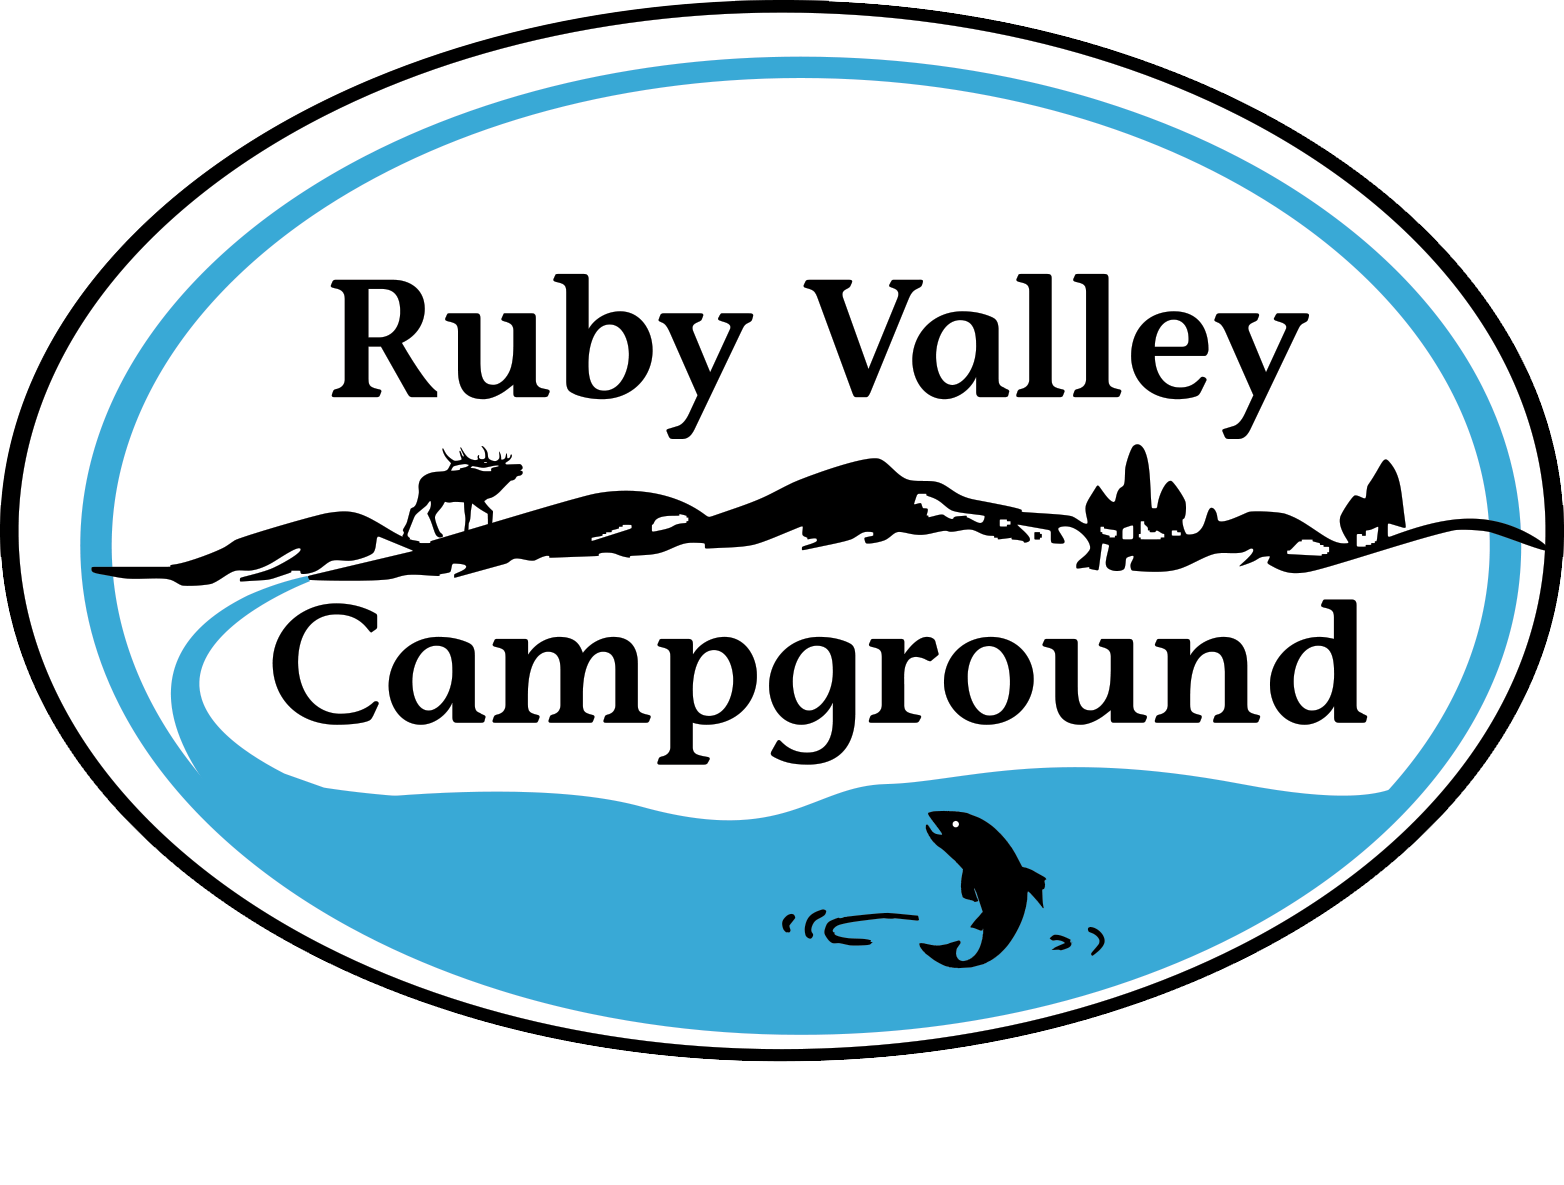 A logo for ruby valley campground with a fish in the water